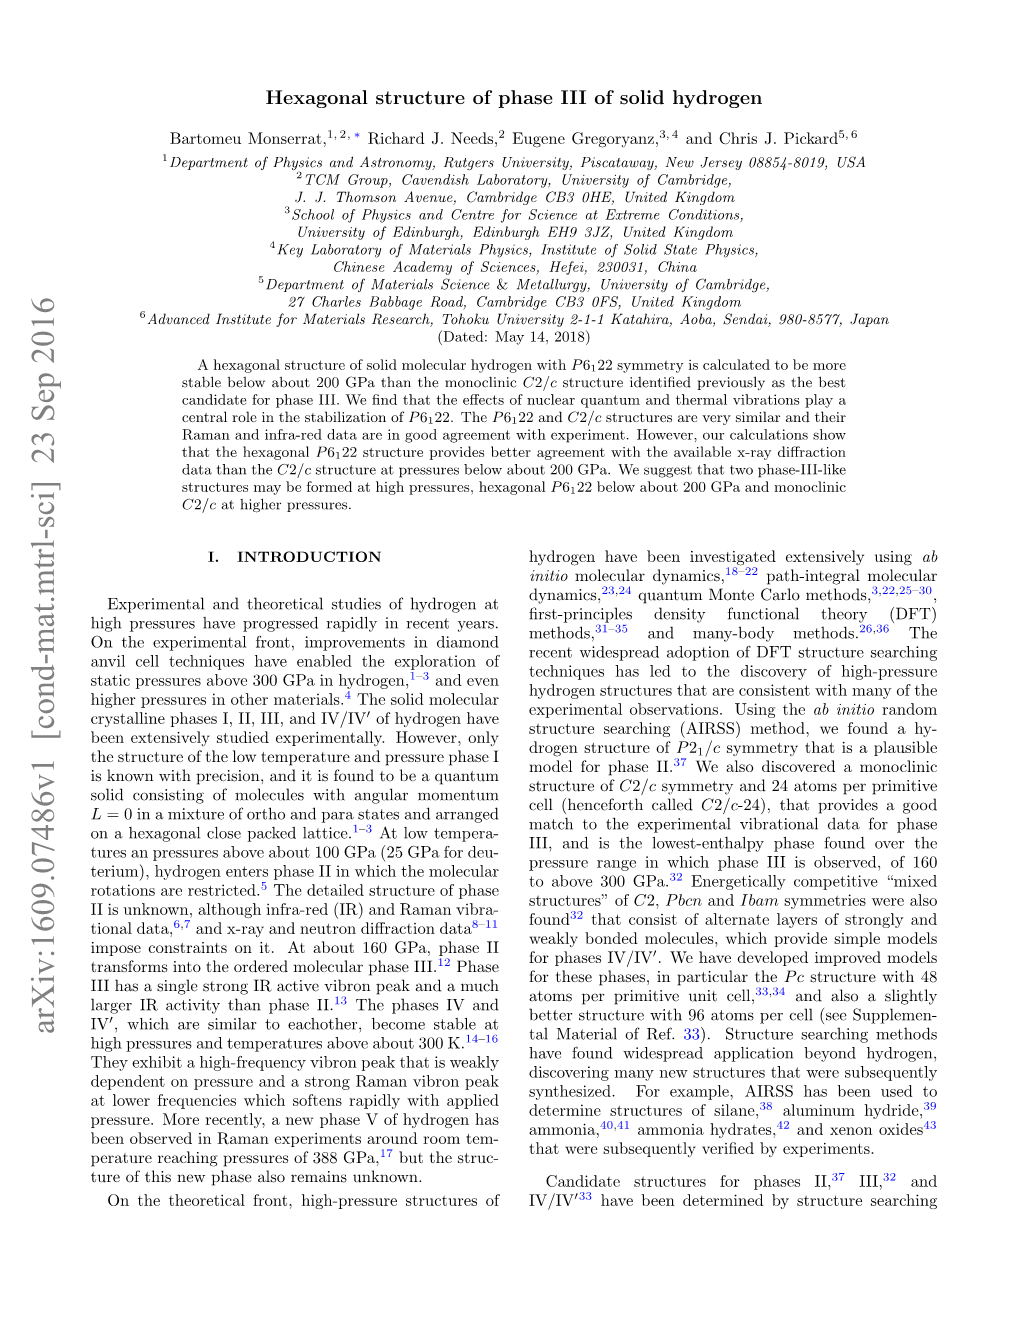 Arxiv:1609.07486V1 [Cond-Mat.Mtrl-Sci] 23 Sep 2016 Tal Material of Ref